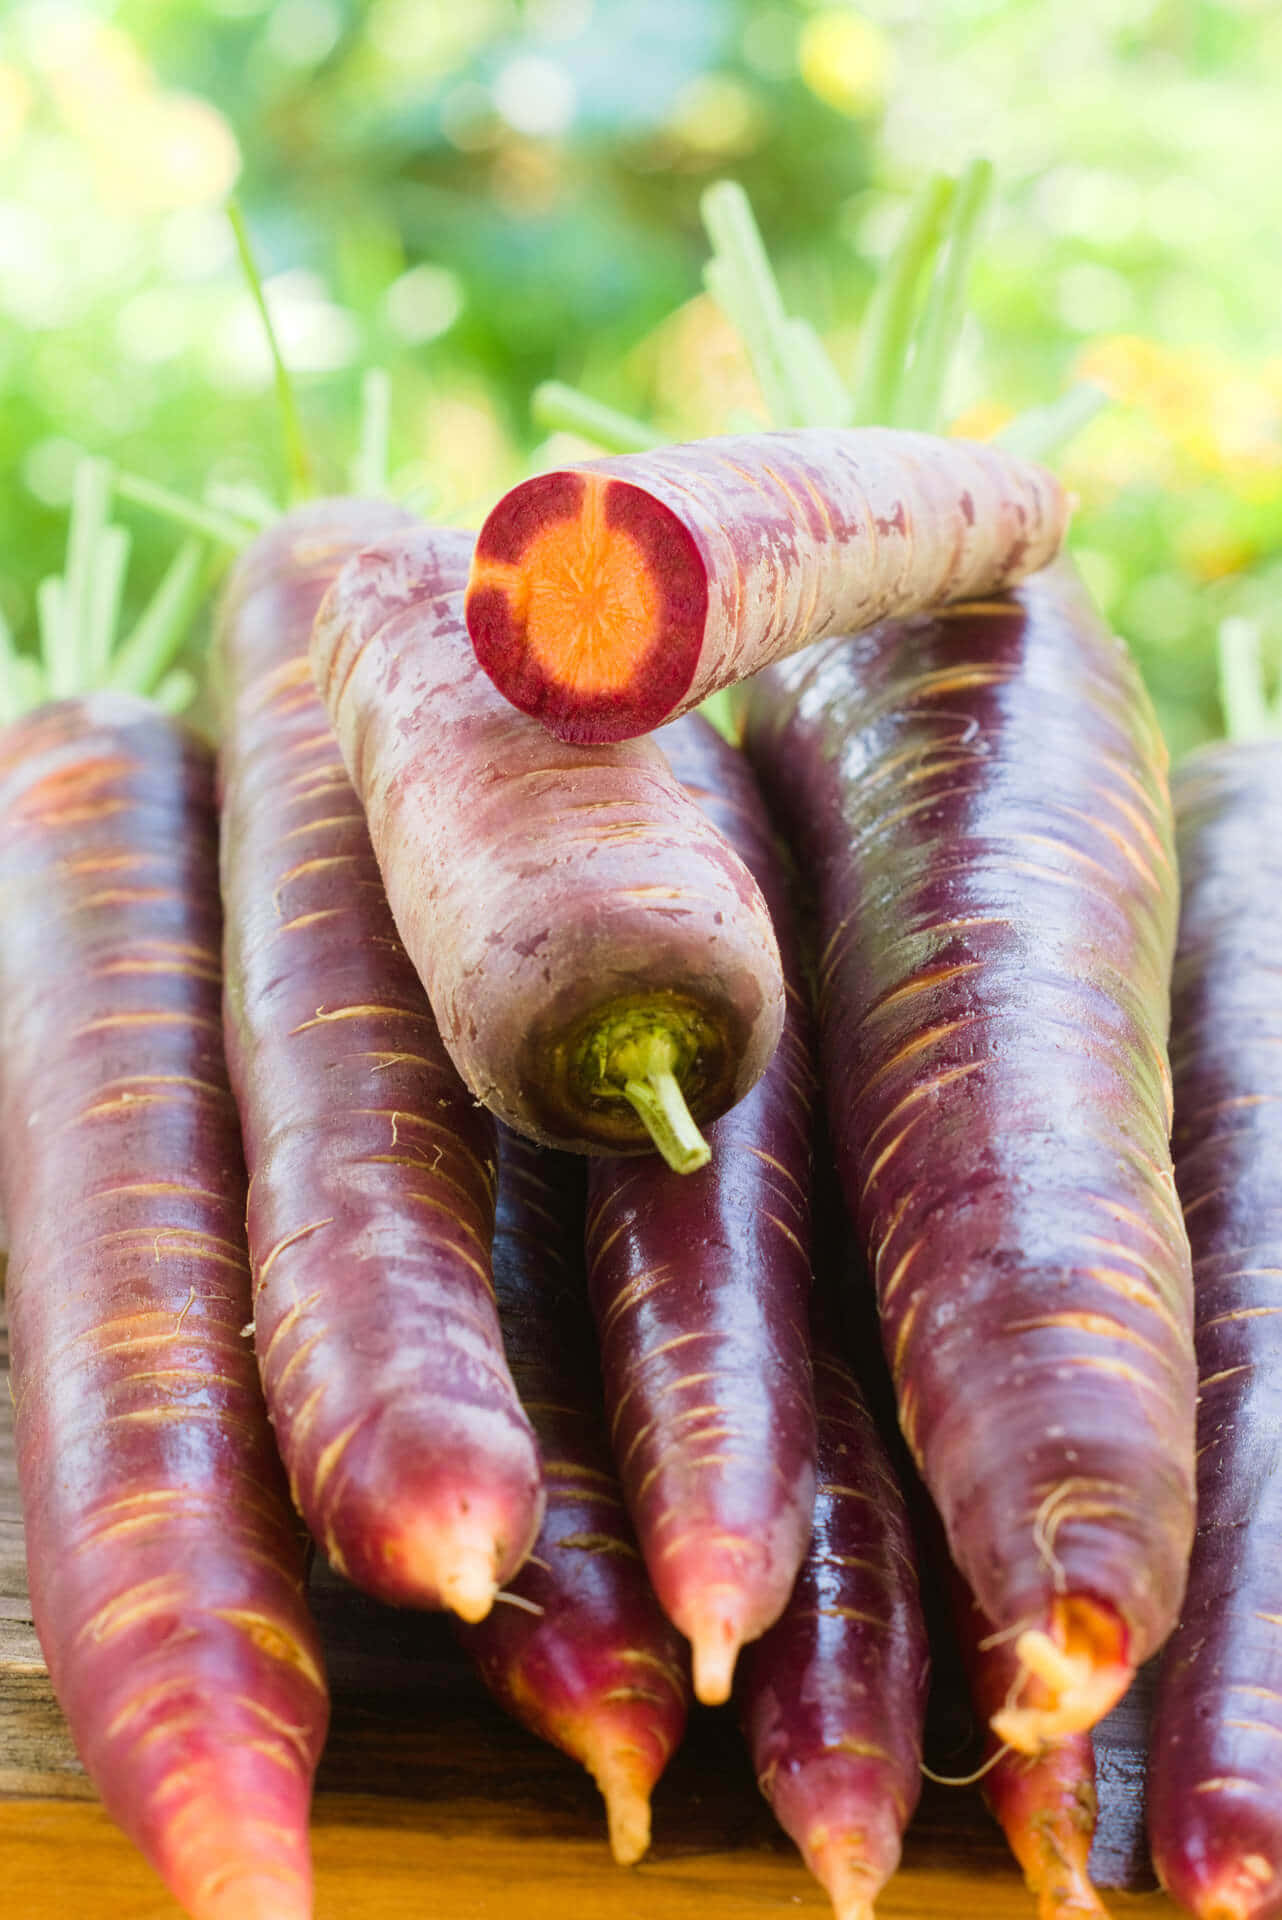 Enjoy the distinctive crunchy texture, earthy sweetness, and vibrant purple color of this Purple Carrot Wallpaper